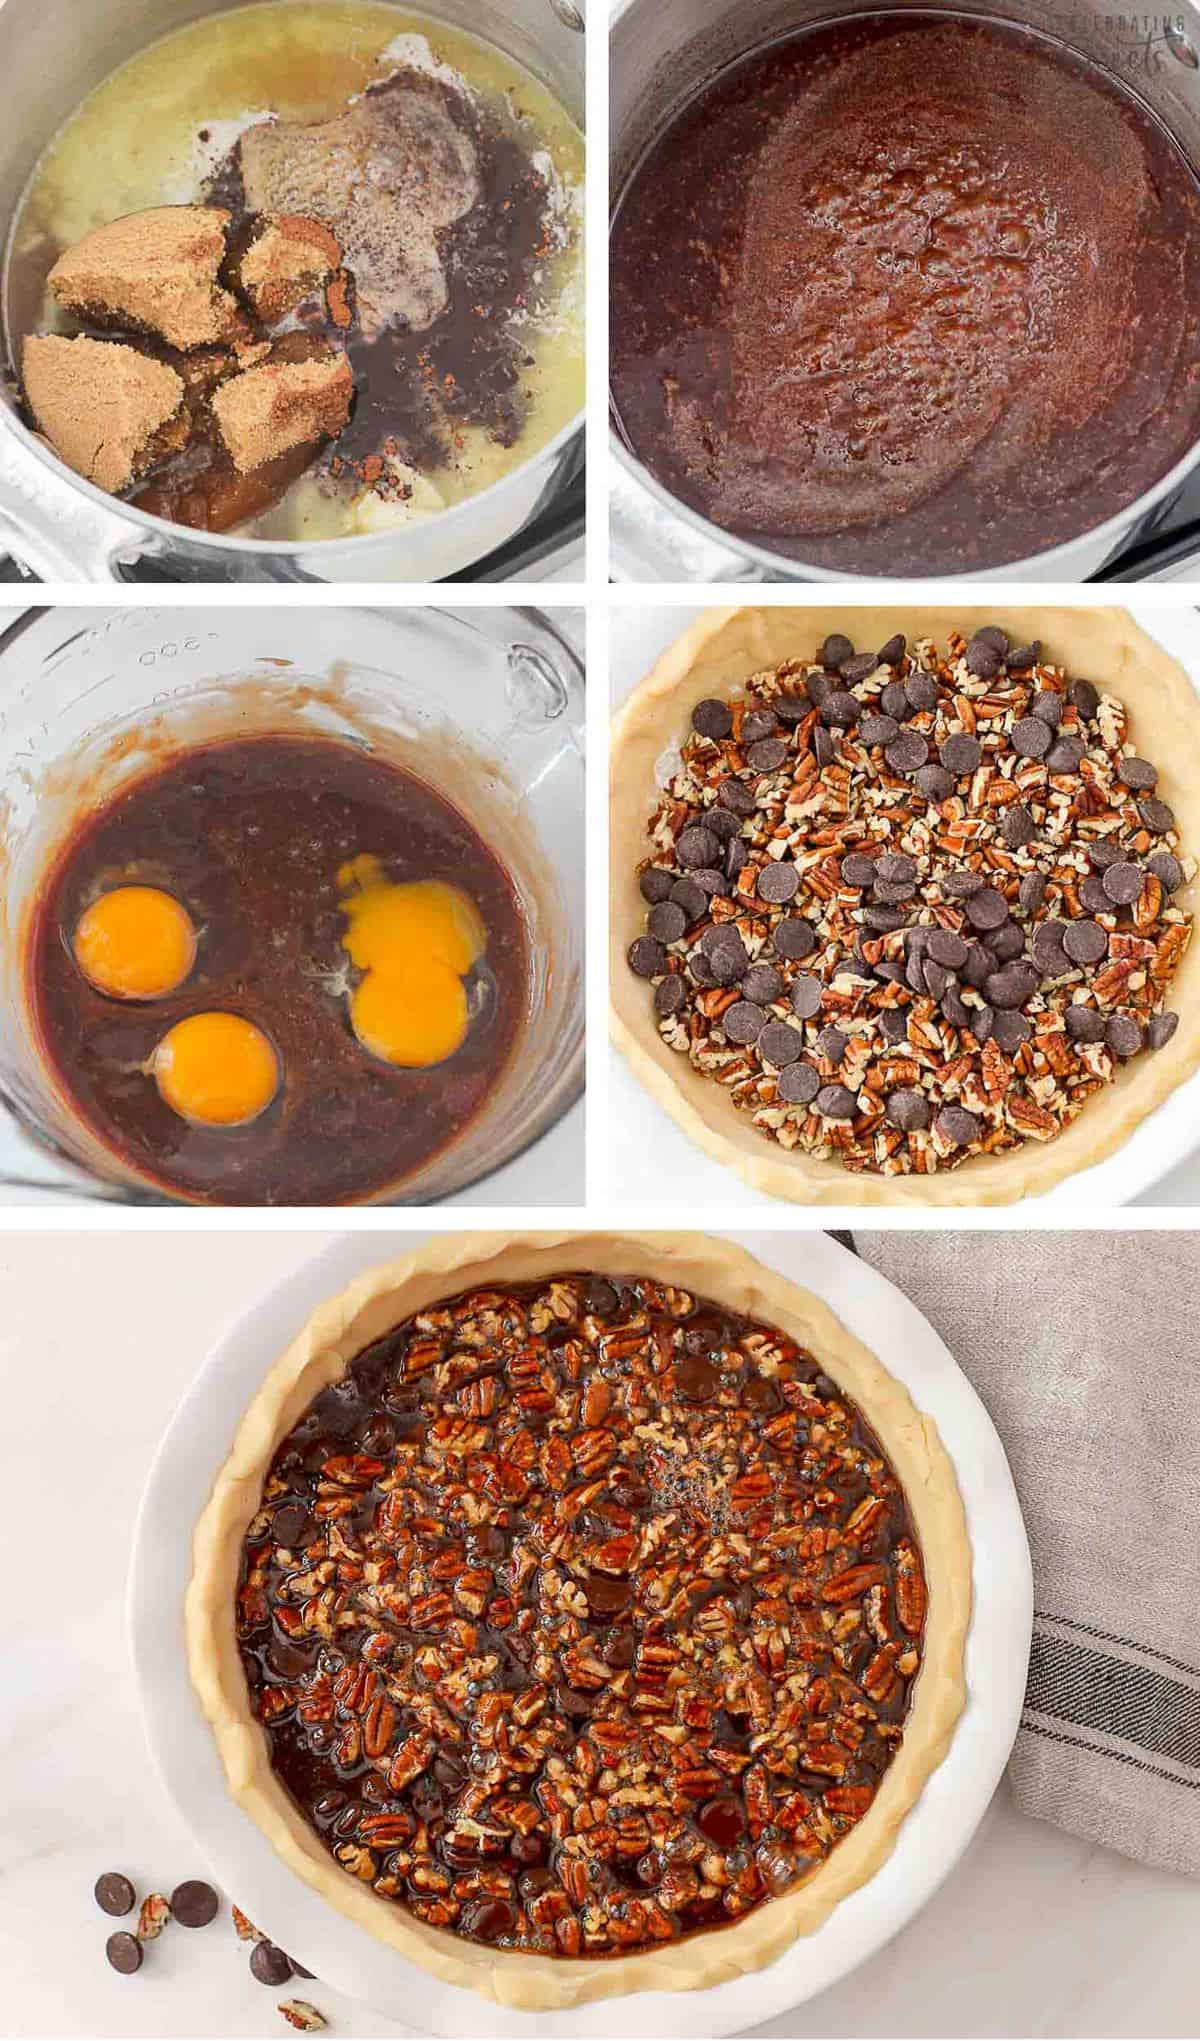 Collage how to make chocolate pecan pie. Brown sugar, butter, syrup in a saucepan with eggs. Filling in crust with chocolate chips and pecans.